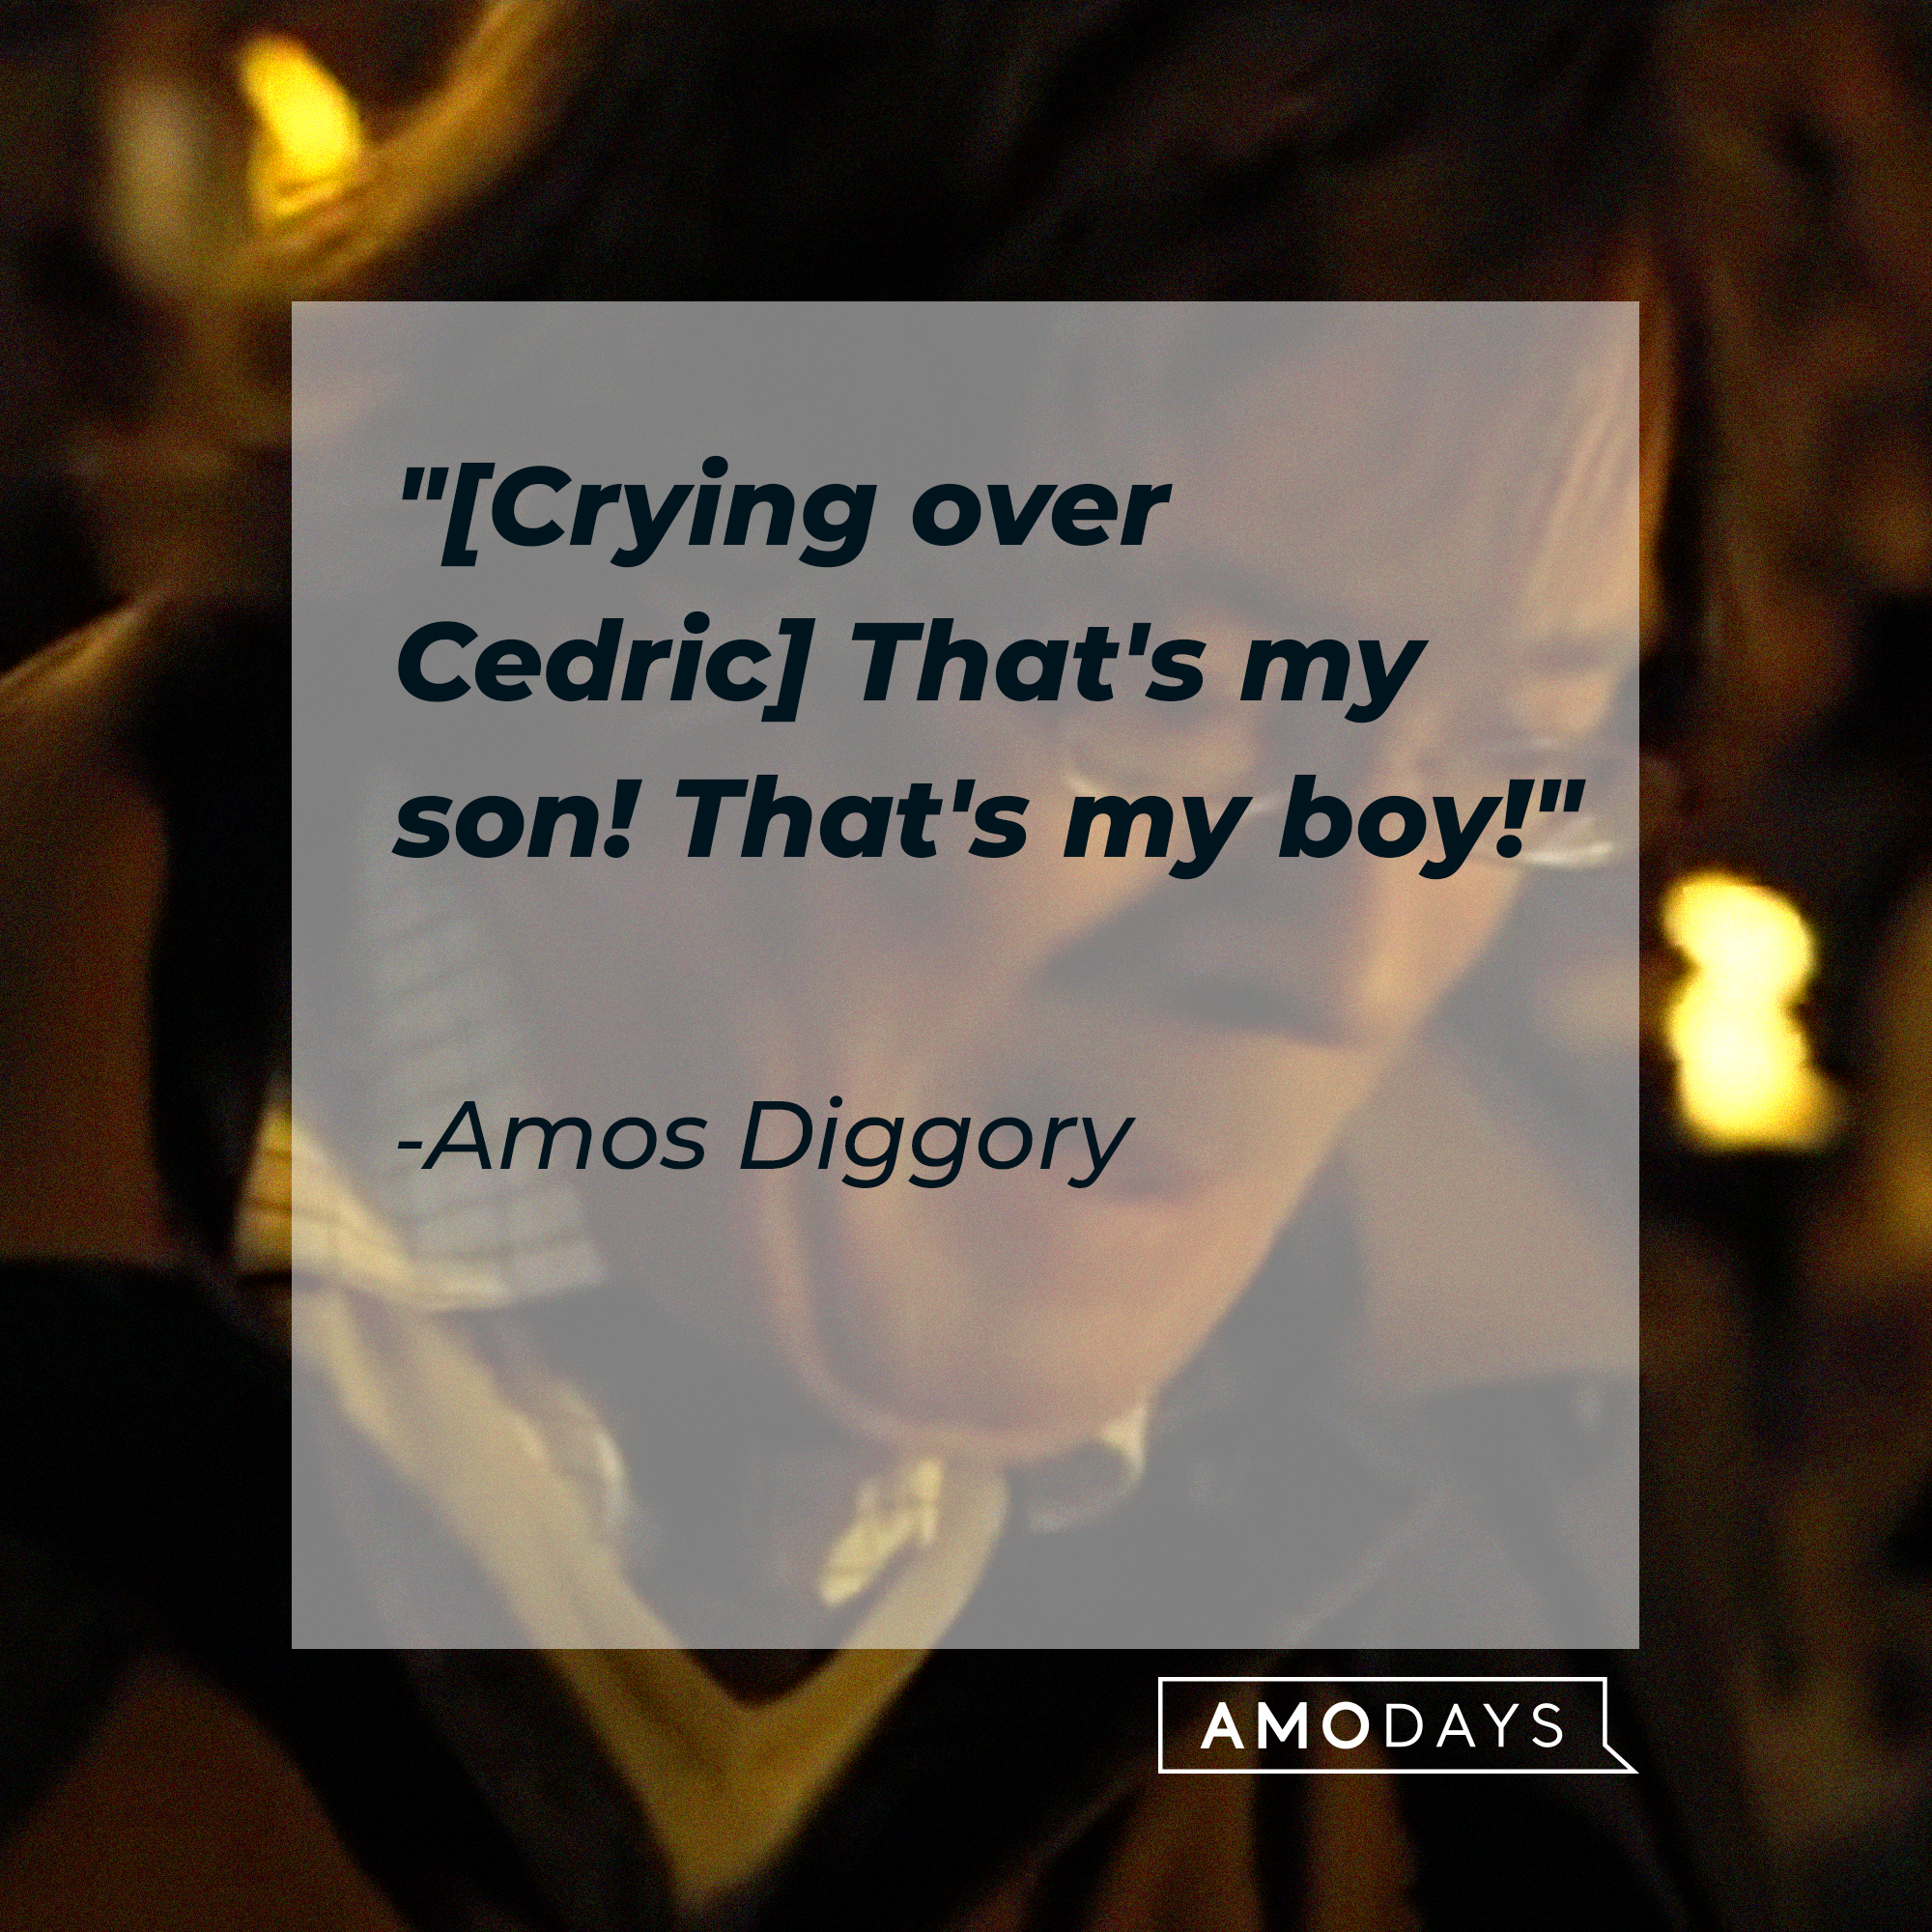 A photo of Amos Diggory with his quote, "[Crying over Cedric] That's my son! That's my boy!" | Source: YouTube/harrypotter